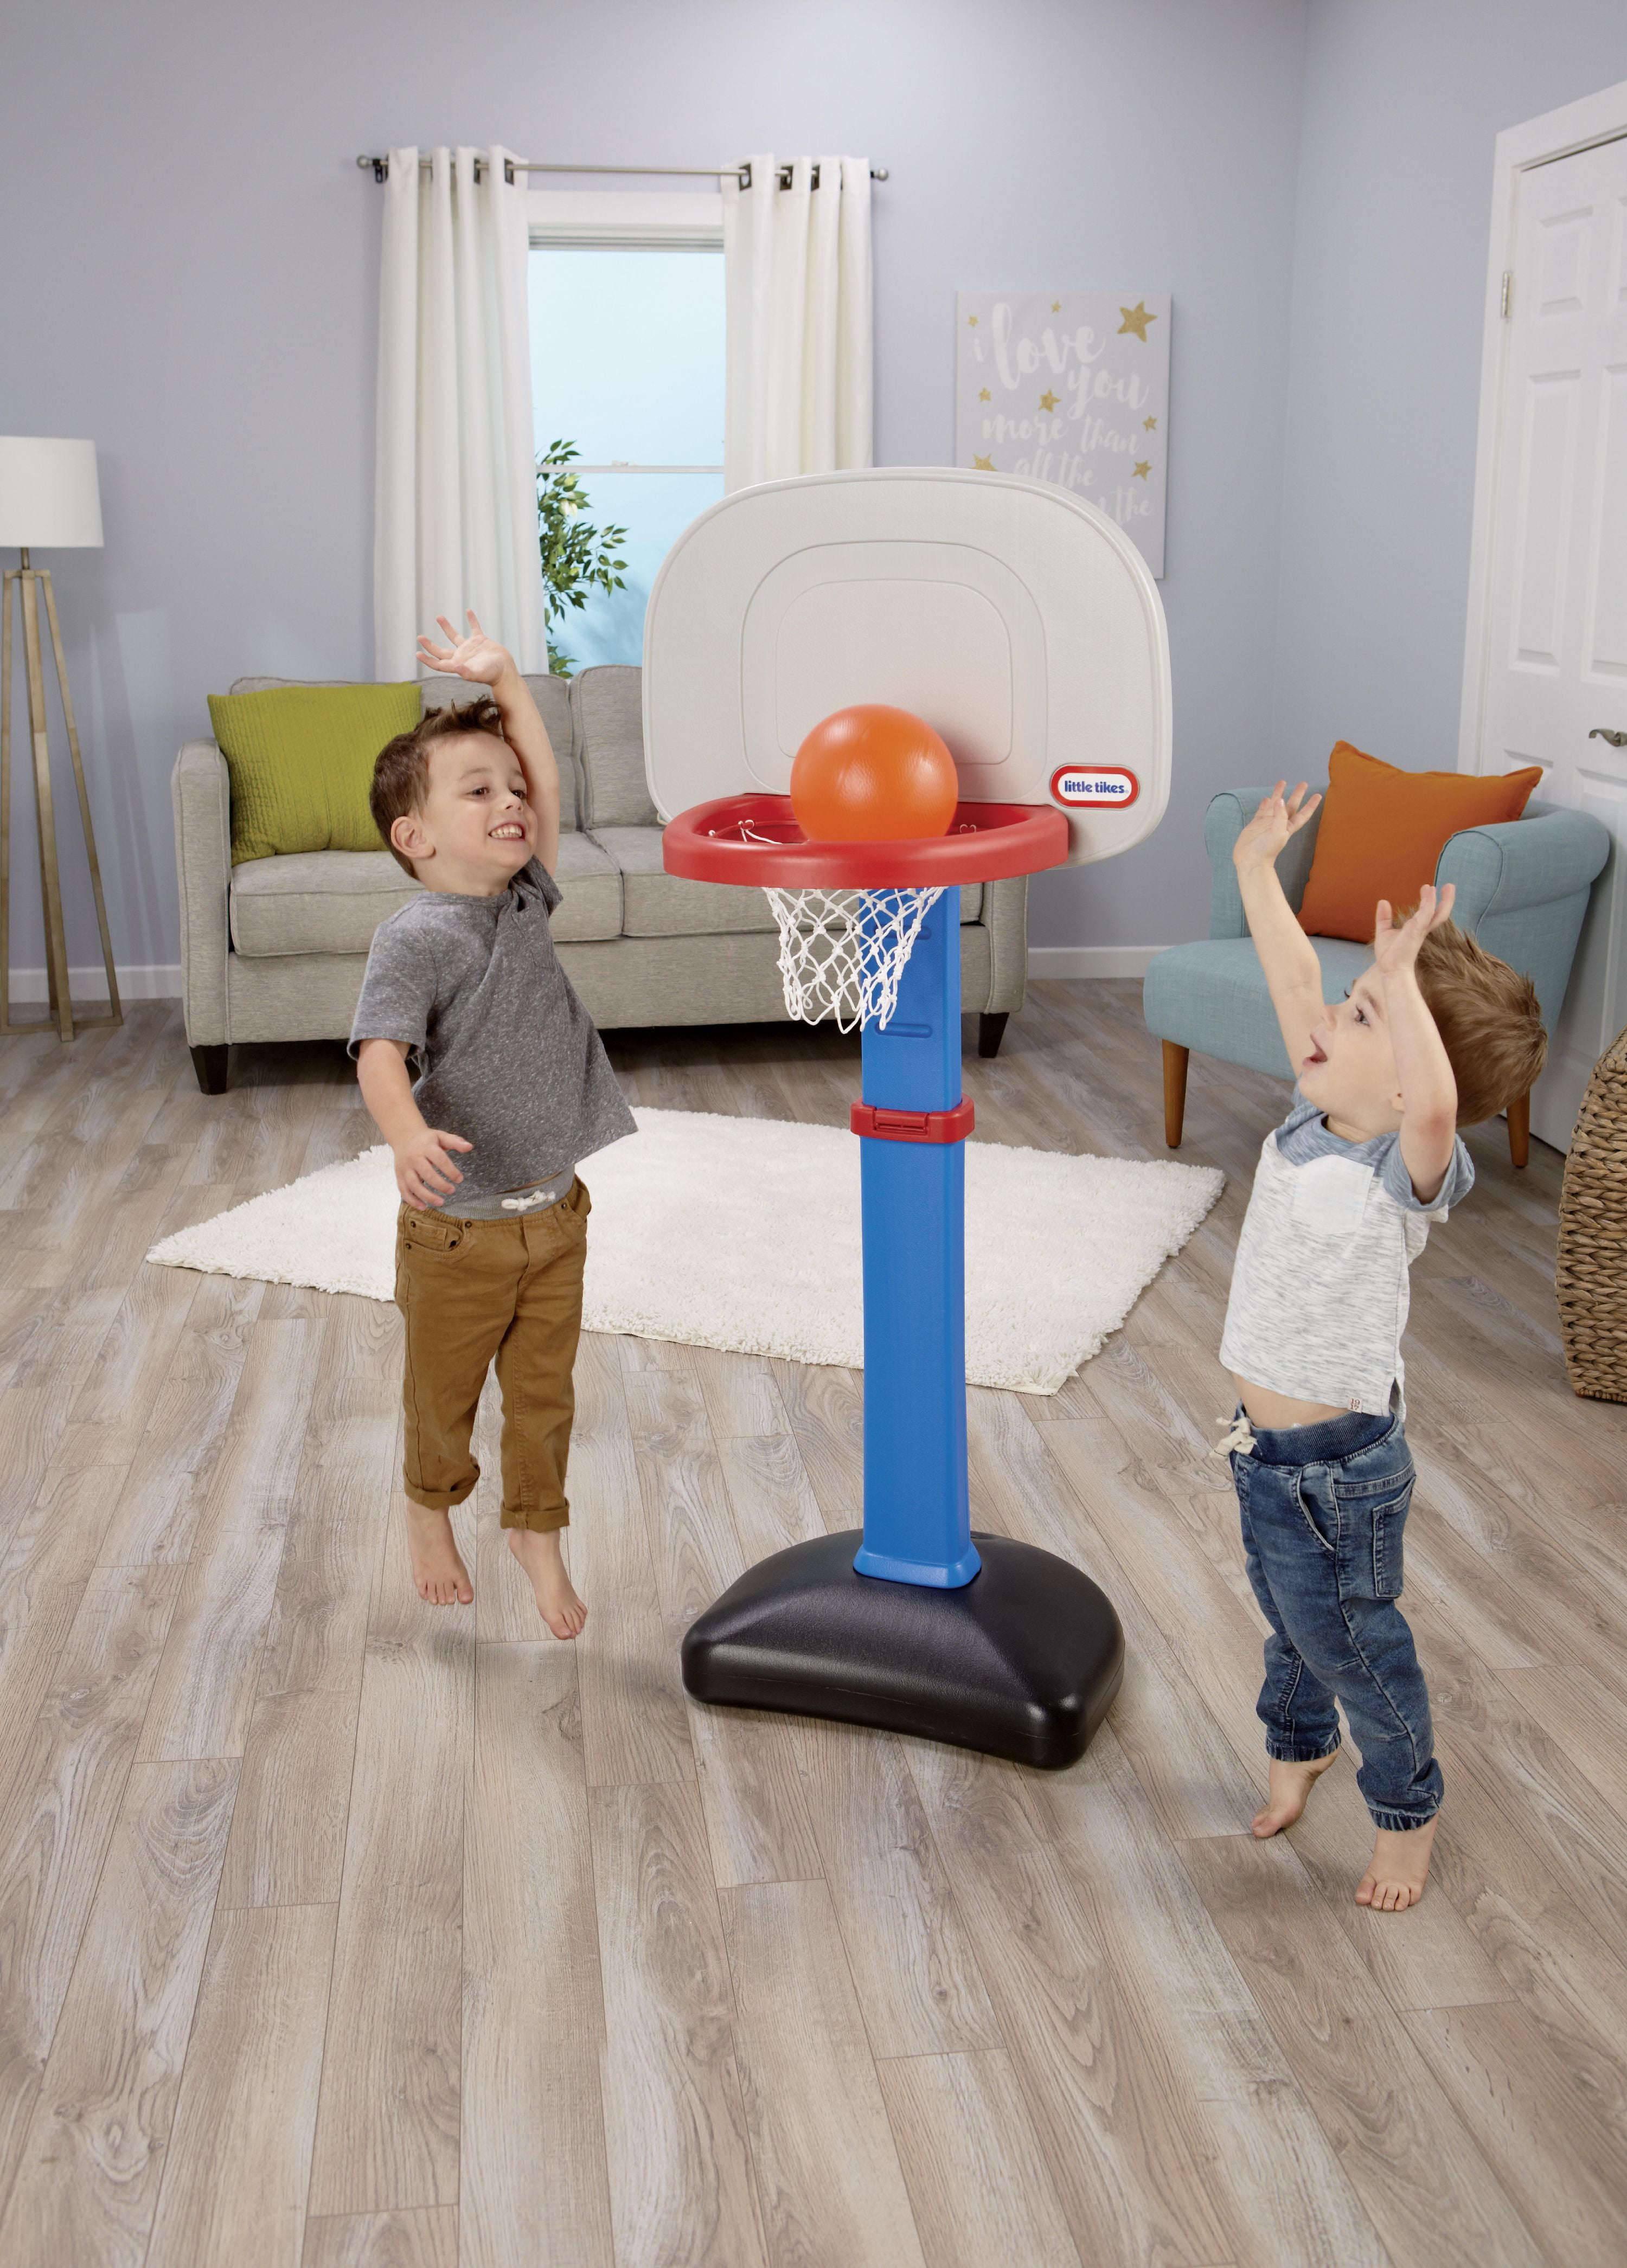 Little Tikes TotSports Easy Score Toy Basketball Hoop with Ball, Height Adjustable, Indoor Outdoor Backyard Toy Sports Play Set For Kids Girls Boys Ages 18 months to 5 Year Old, Blue - 3